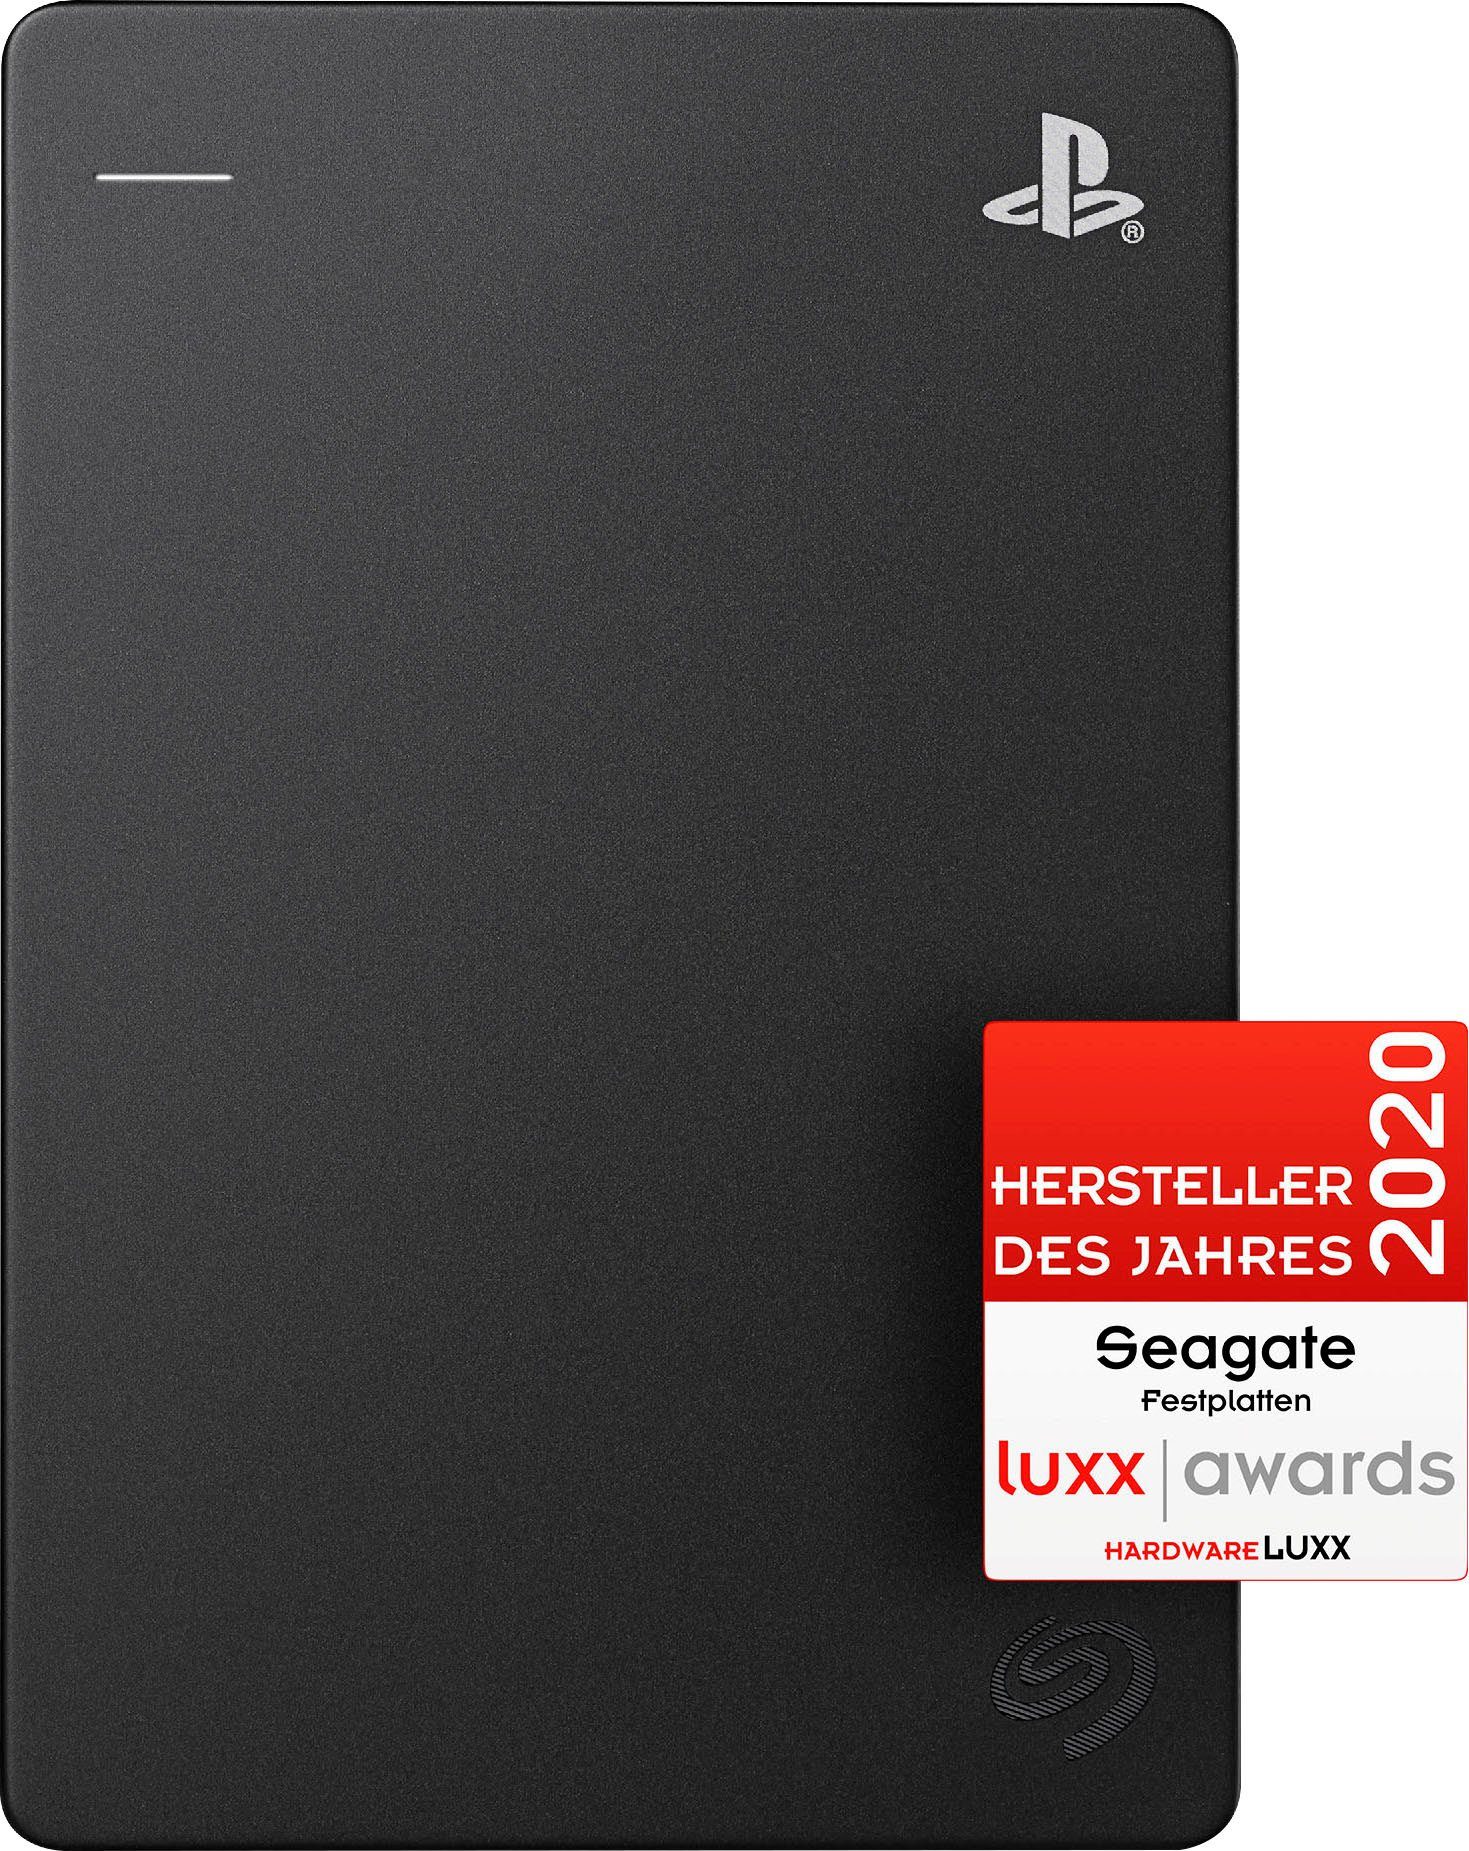 Seagate »Game Drive PS4 STGD2000200« externe Gaming-Festplatte (2 TB) 2,5"